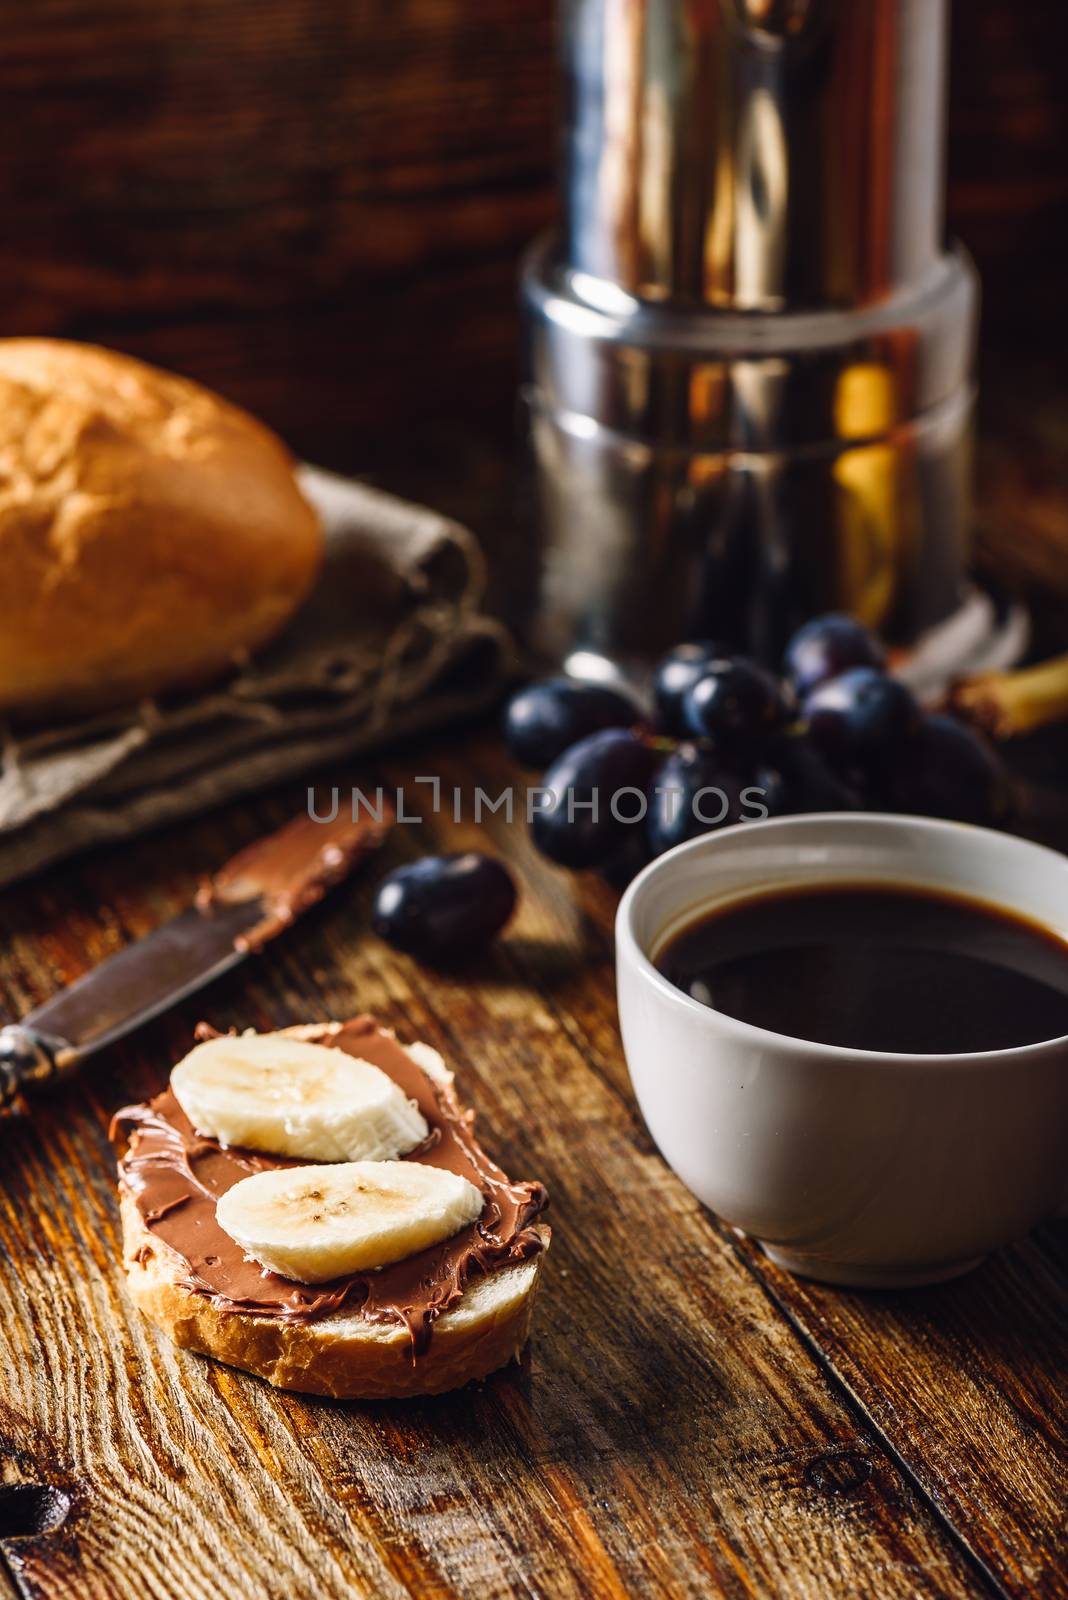 Breakfast with Banana Sandwich with Chocolate Spread, Coffee Cup and Grapes. Vertical Orientation.